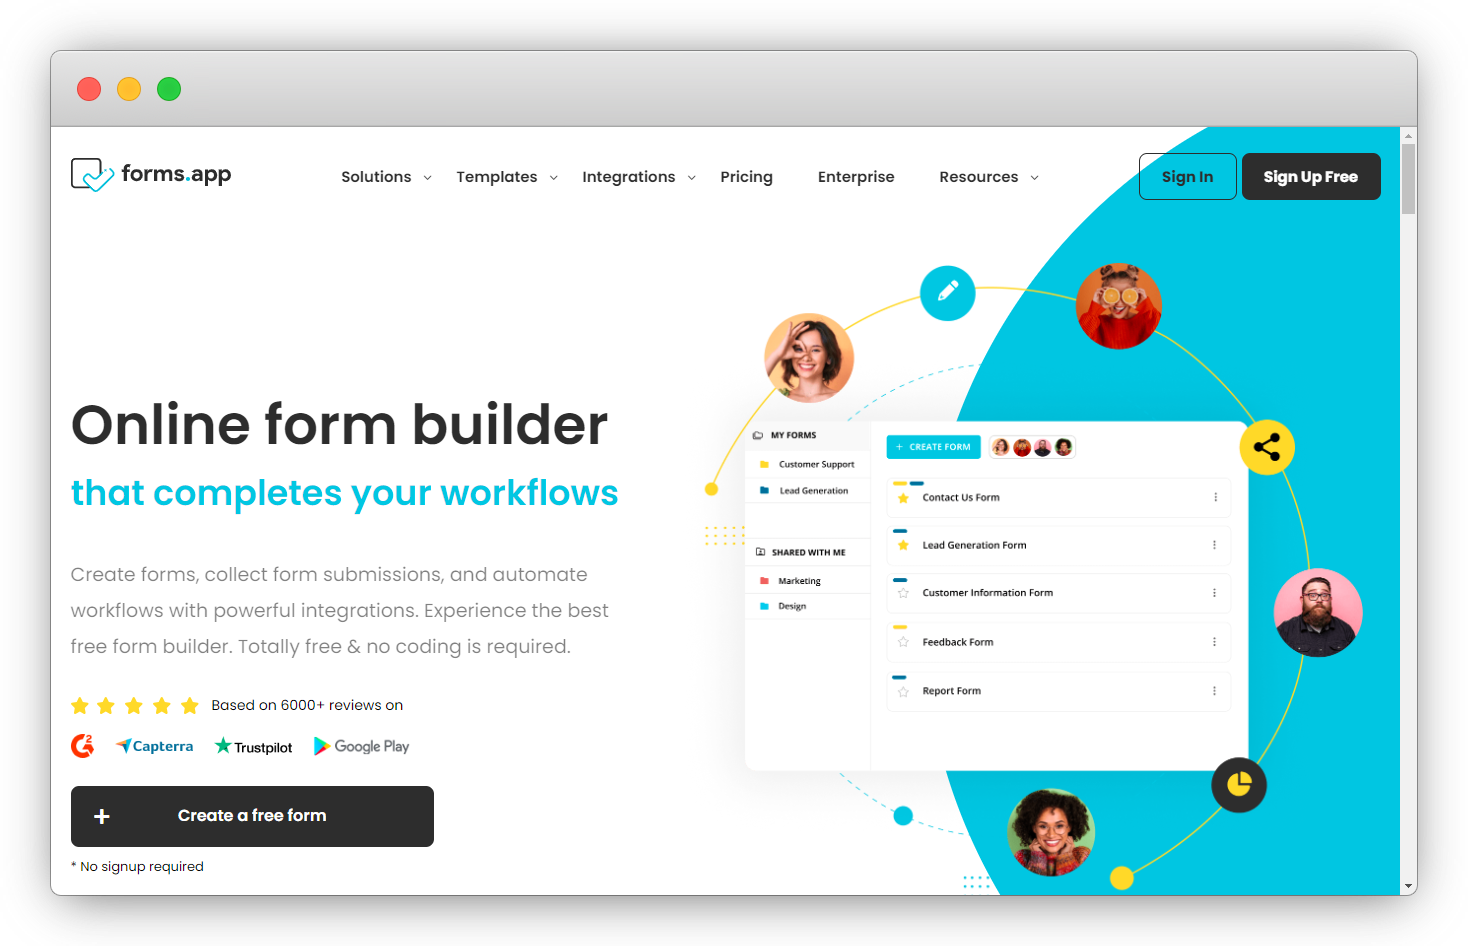 cx software-forms.app